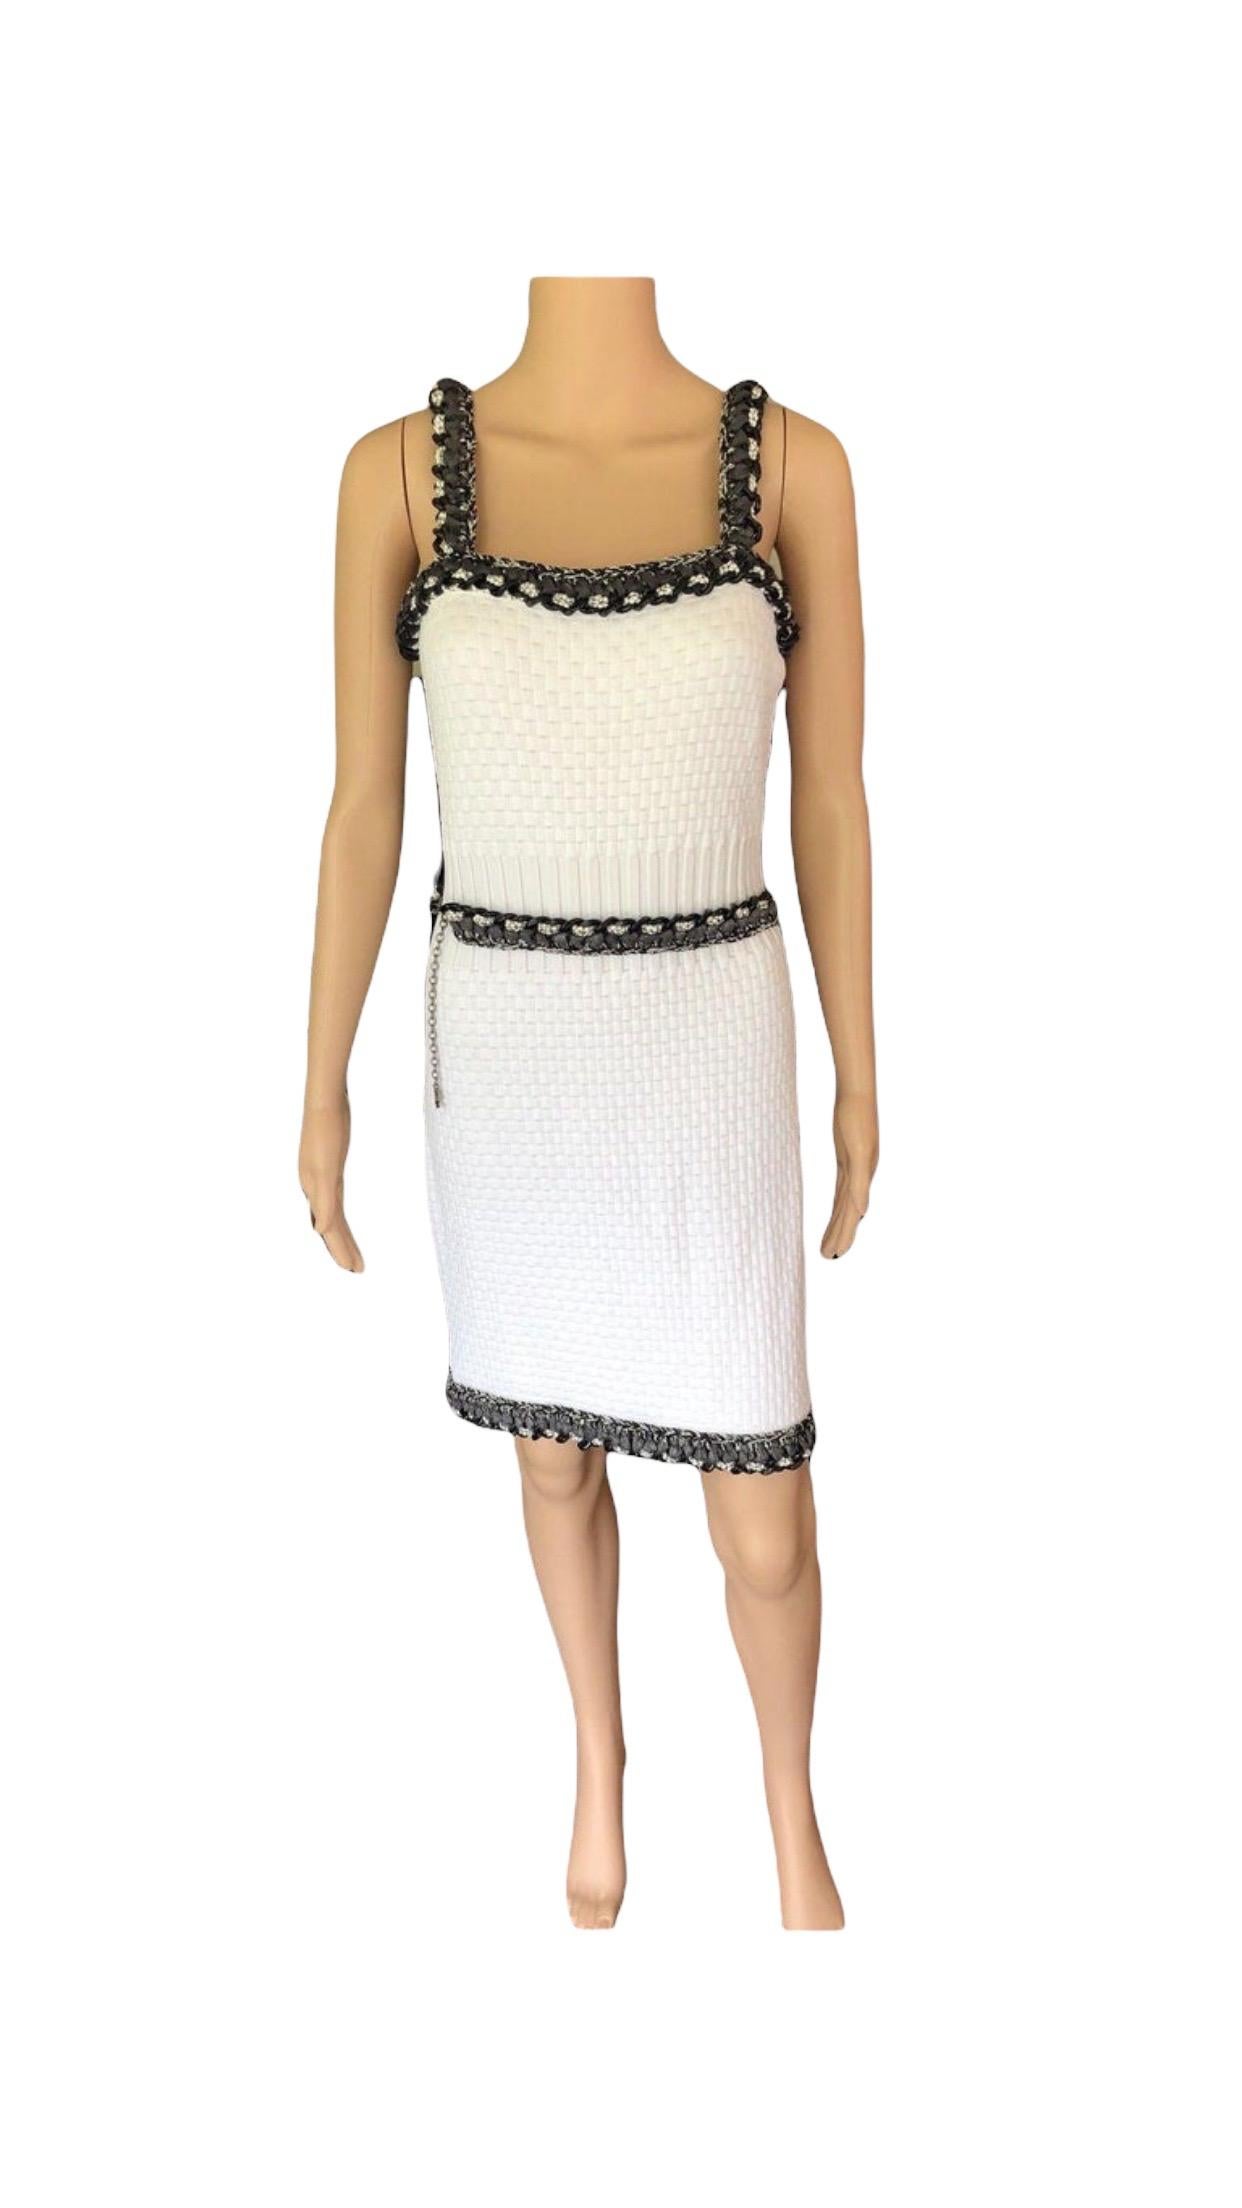 New Chanel S/S 2014 Runway Knit Chain Embellished Trim White Mini Dress In New Condition For Sale In Naples, FL